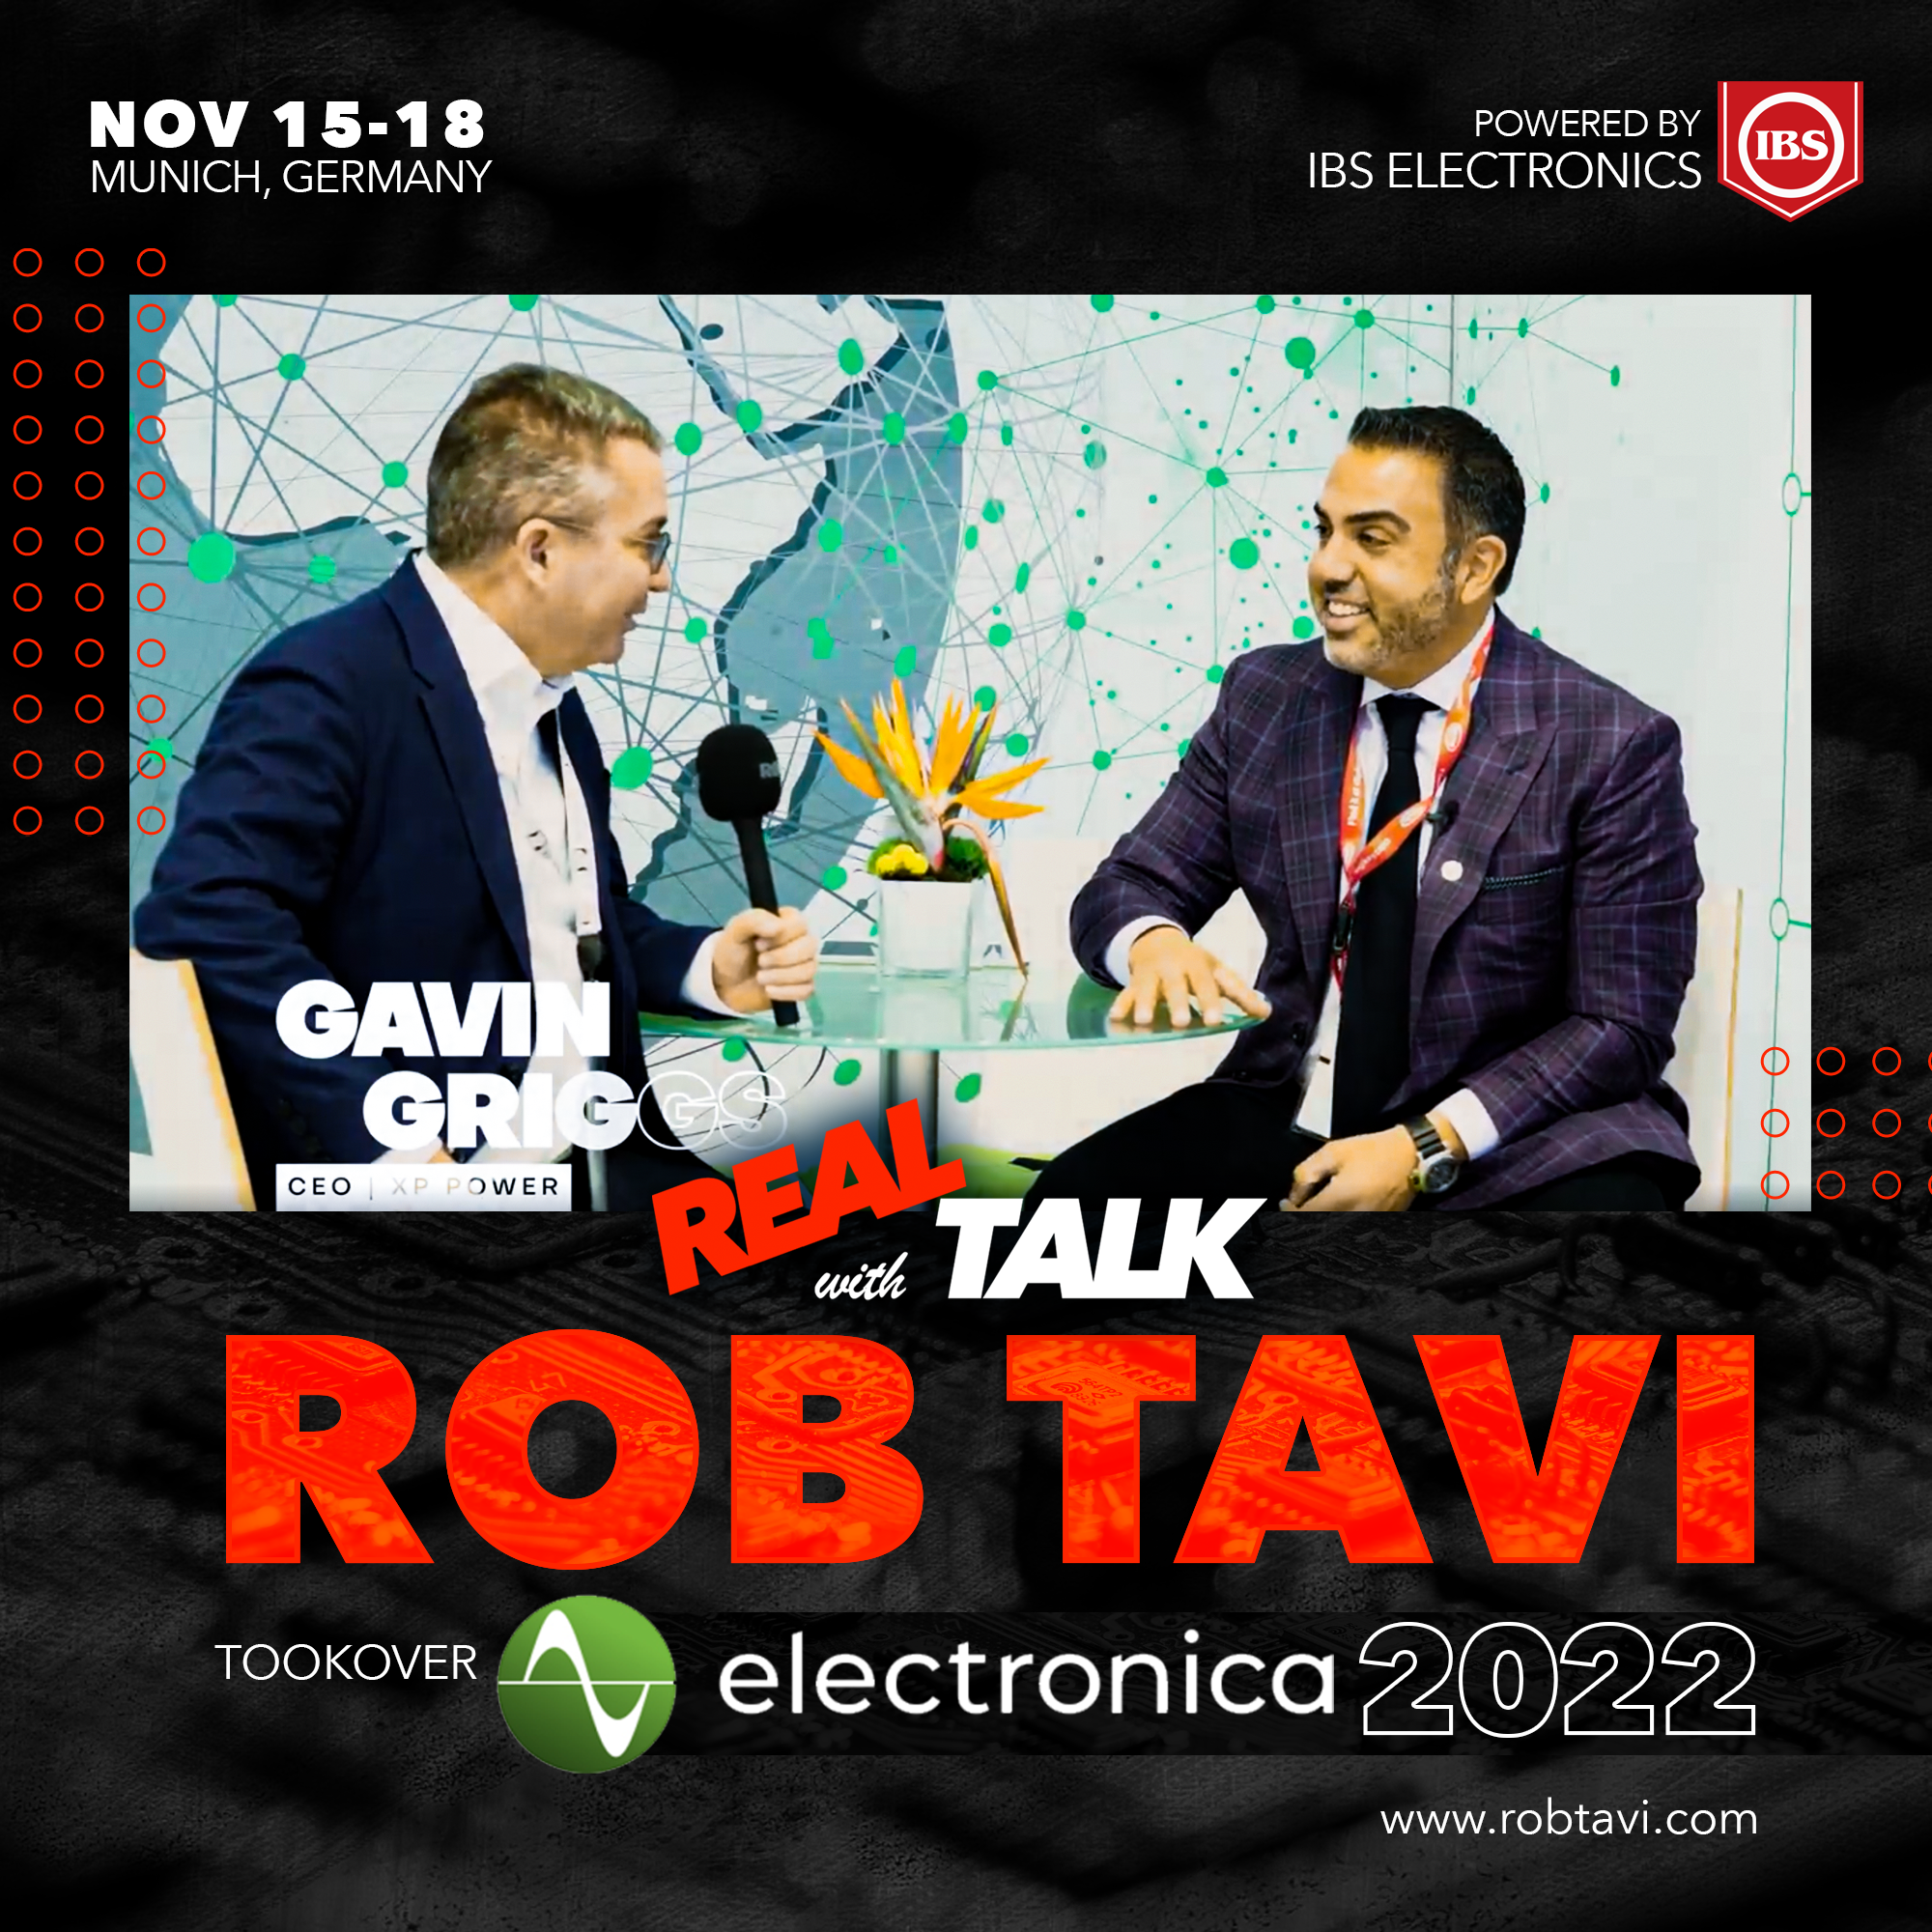 Real Talk with Rob Tavi Podcast tookover electronica 2022 at the Messe München